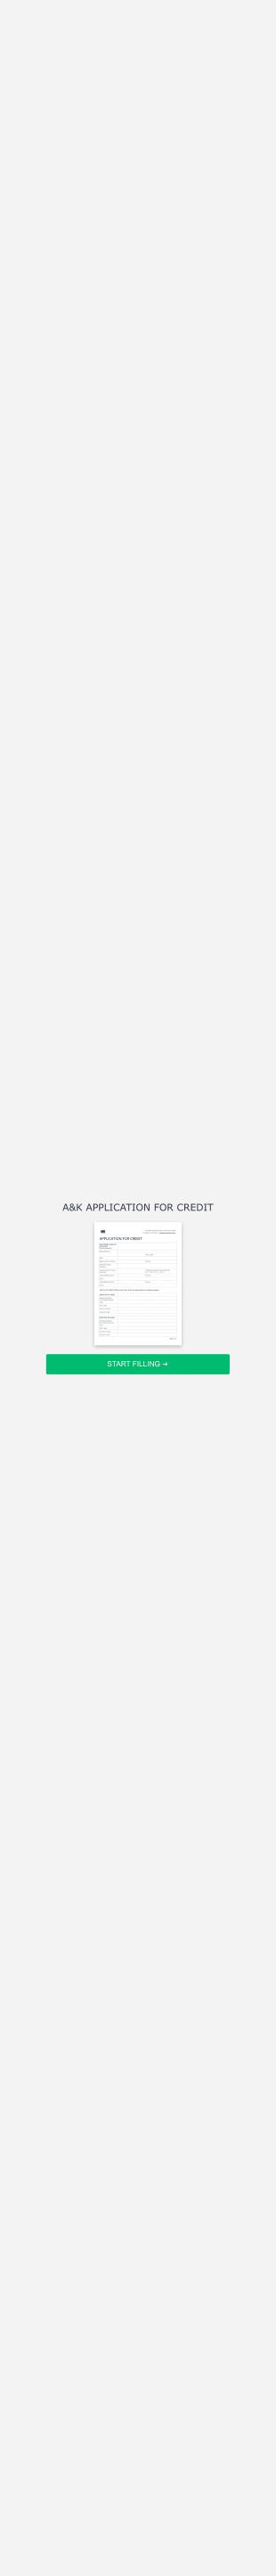 Application For Credit Form Template